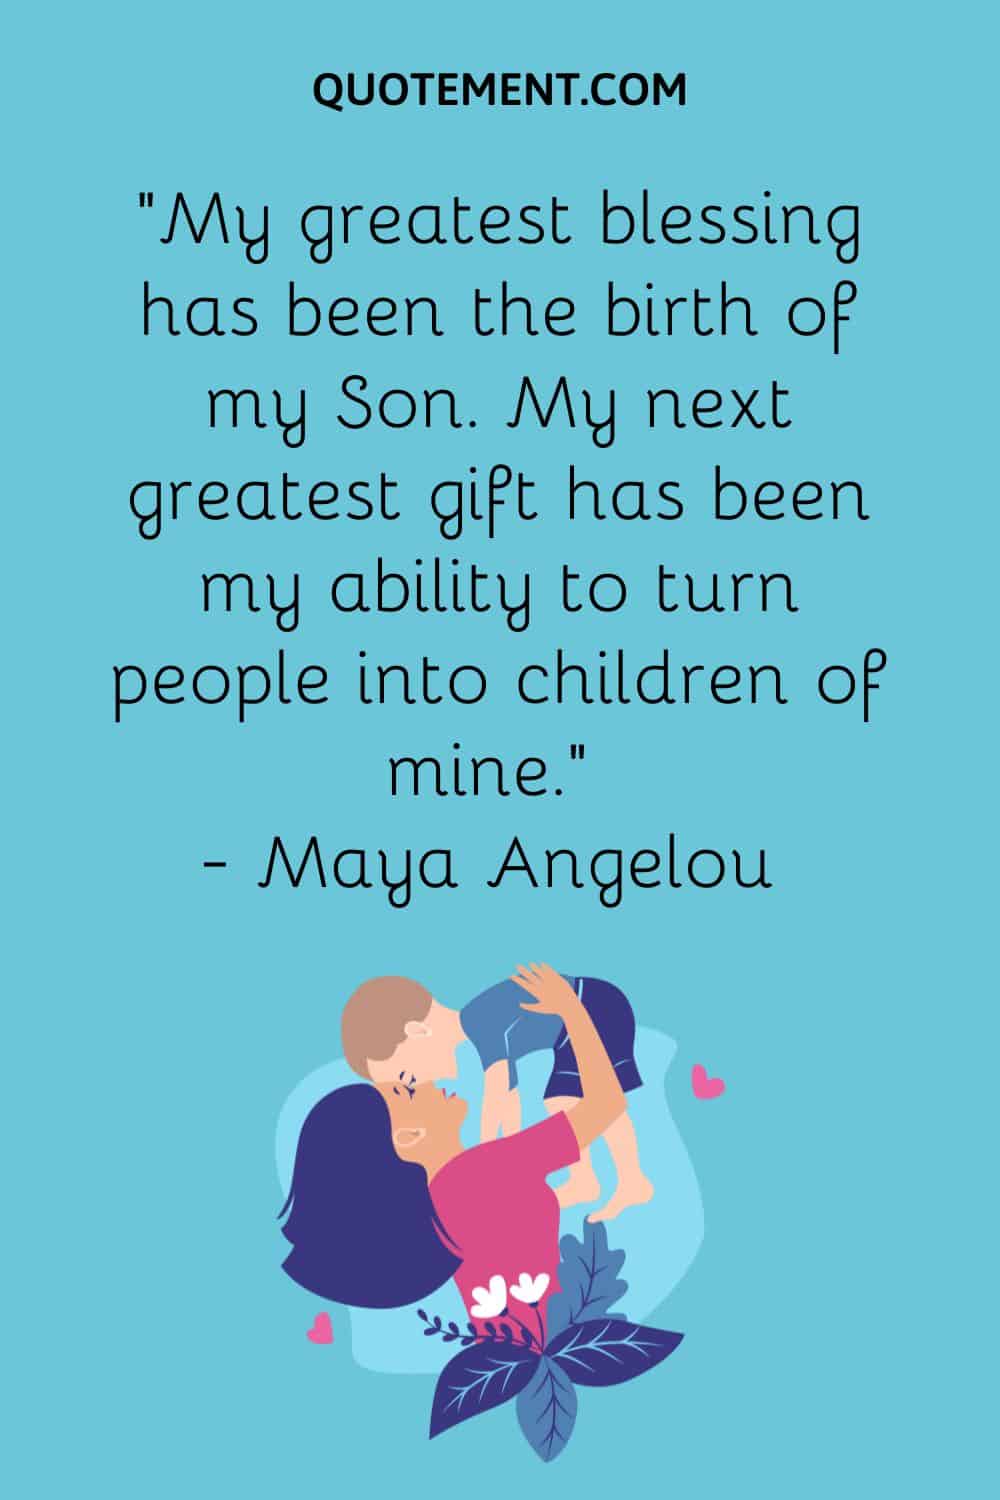 “My greatest blessing has been the birth of my Son. My next greatest gift has been my ability to turn people into children of mine.“ — Maya Angelou